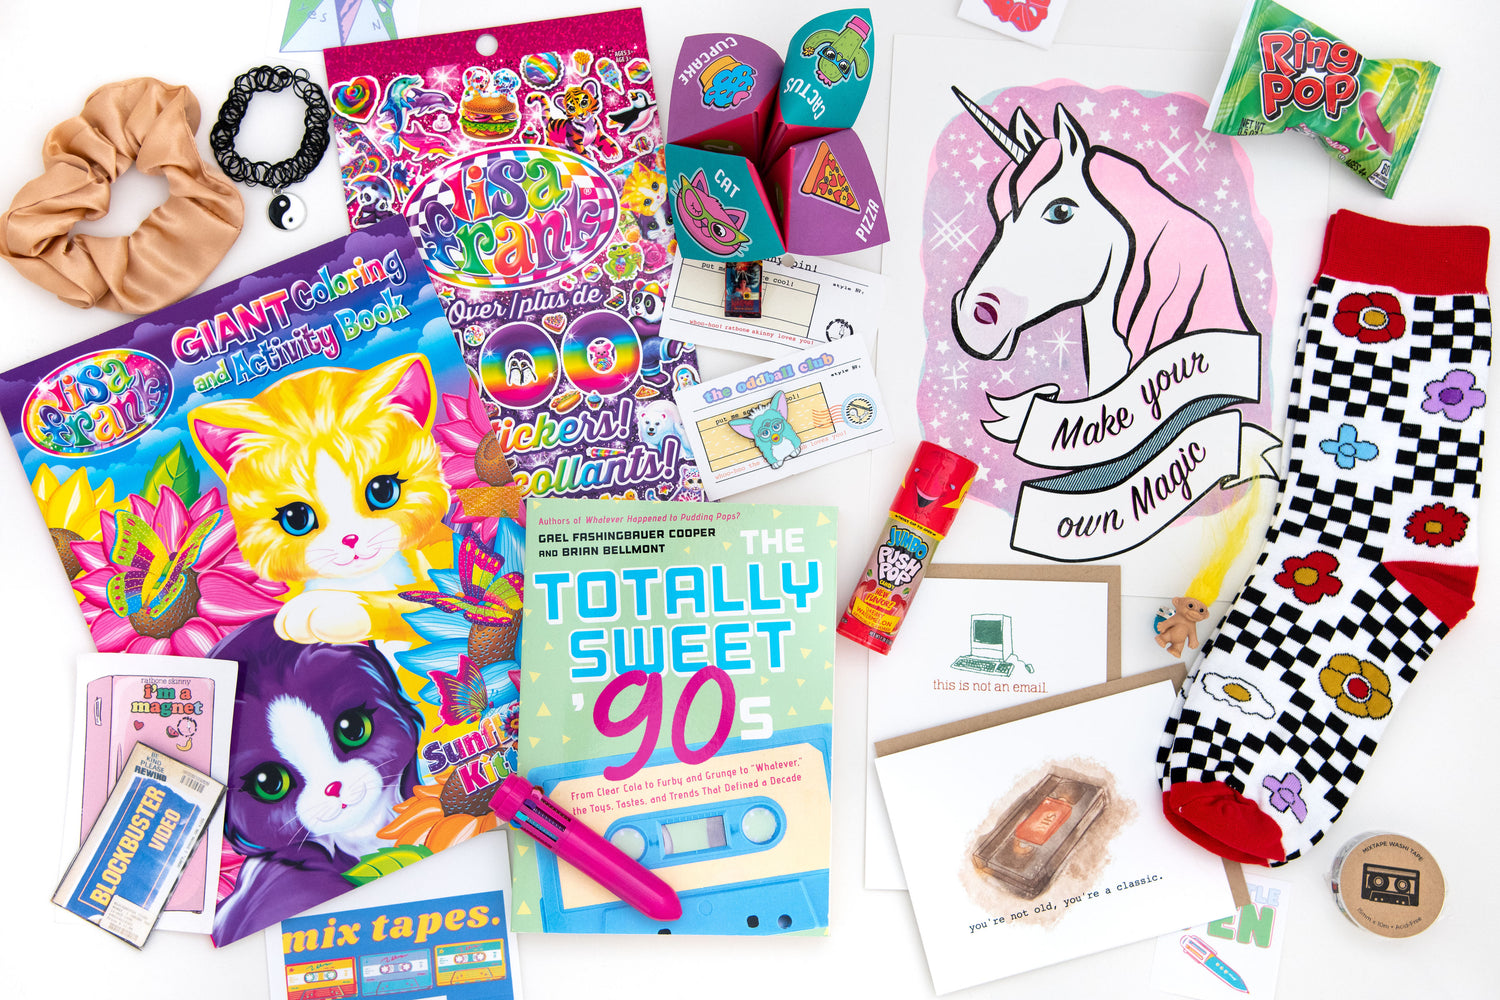 Get ready to party like it's the '90s with The Oddball Club's subscription box! Unleash your nostalgia with a pair of funky socks, a unicorn art print, a videocassette-shaped greeting card, a ring pop in a green bag, a cute Furby enamel pin, a 'Totally Sweet 90s' book, and a Blockbuster magnet. Order now and relive the good old days!